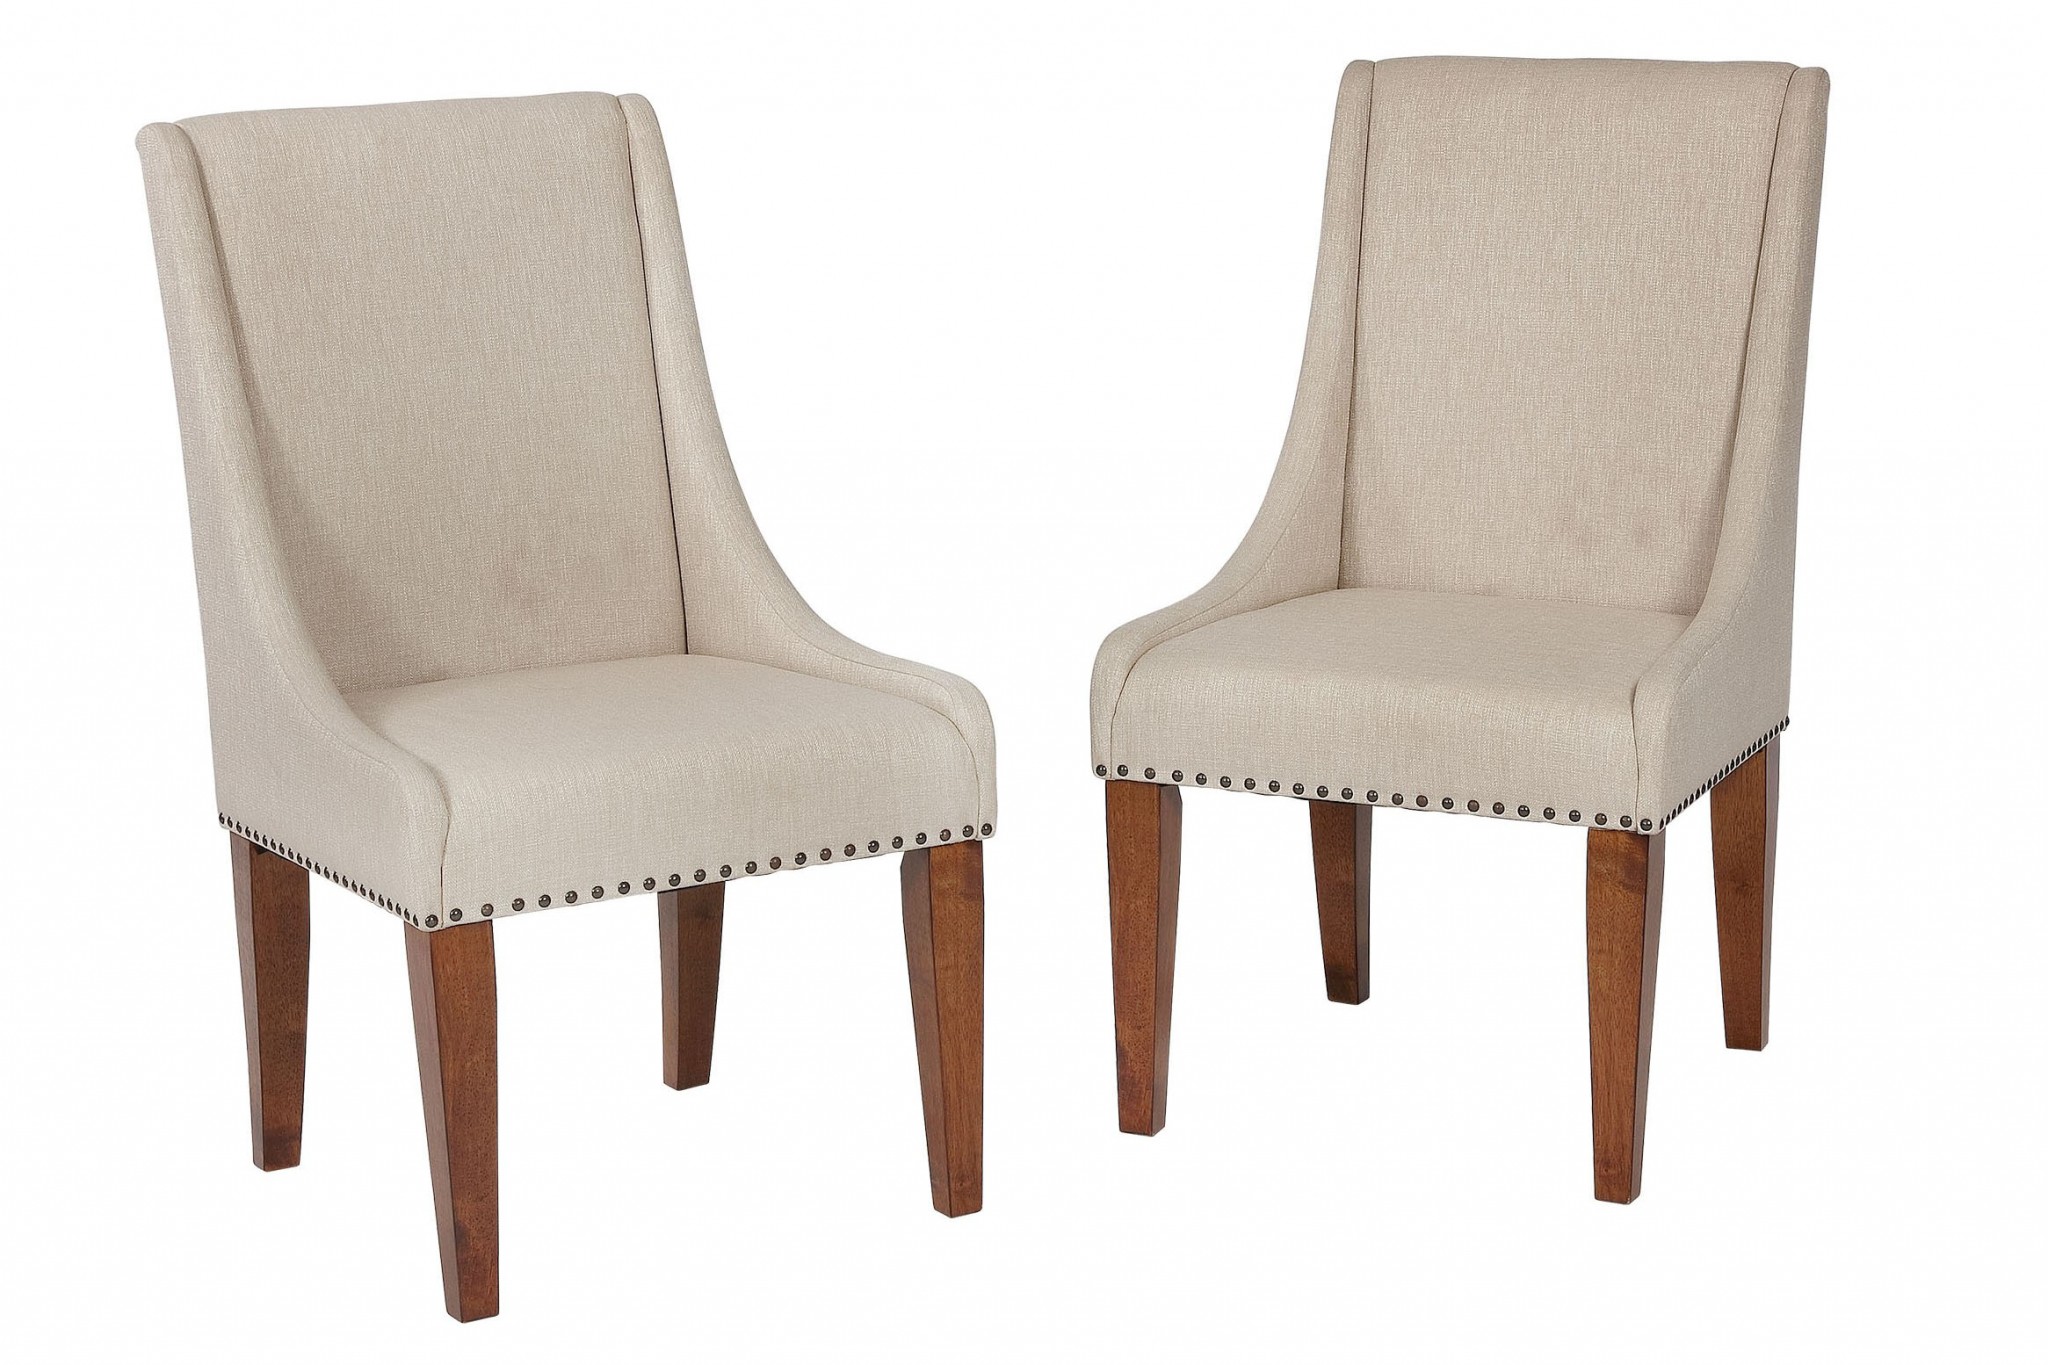 22" X 27" X 40" Tobacco Upholstered with wood trim Set of Two Chairs